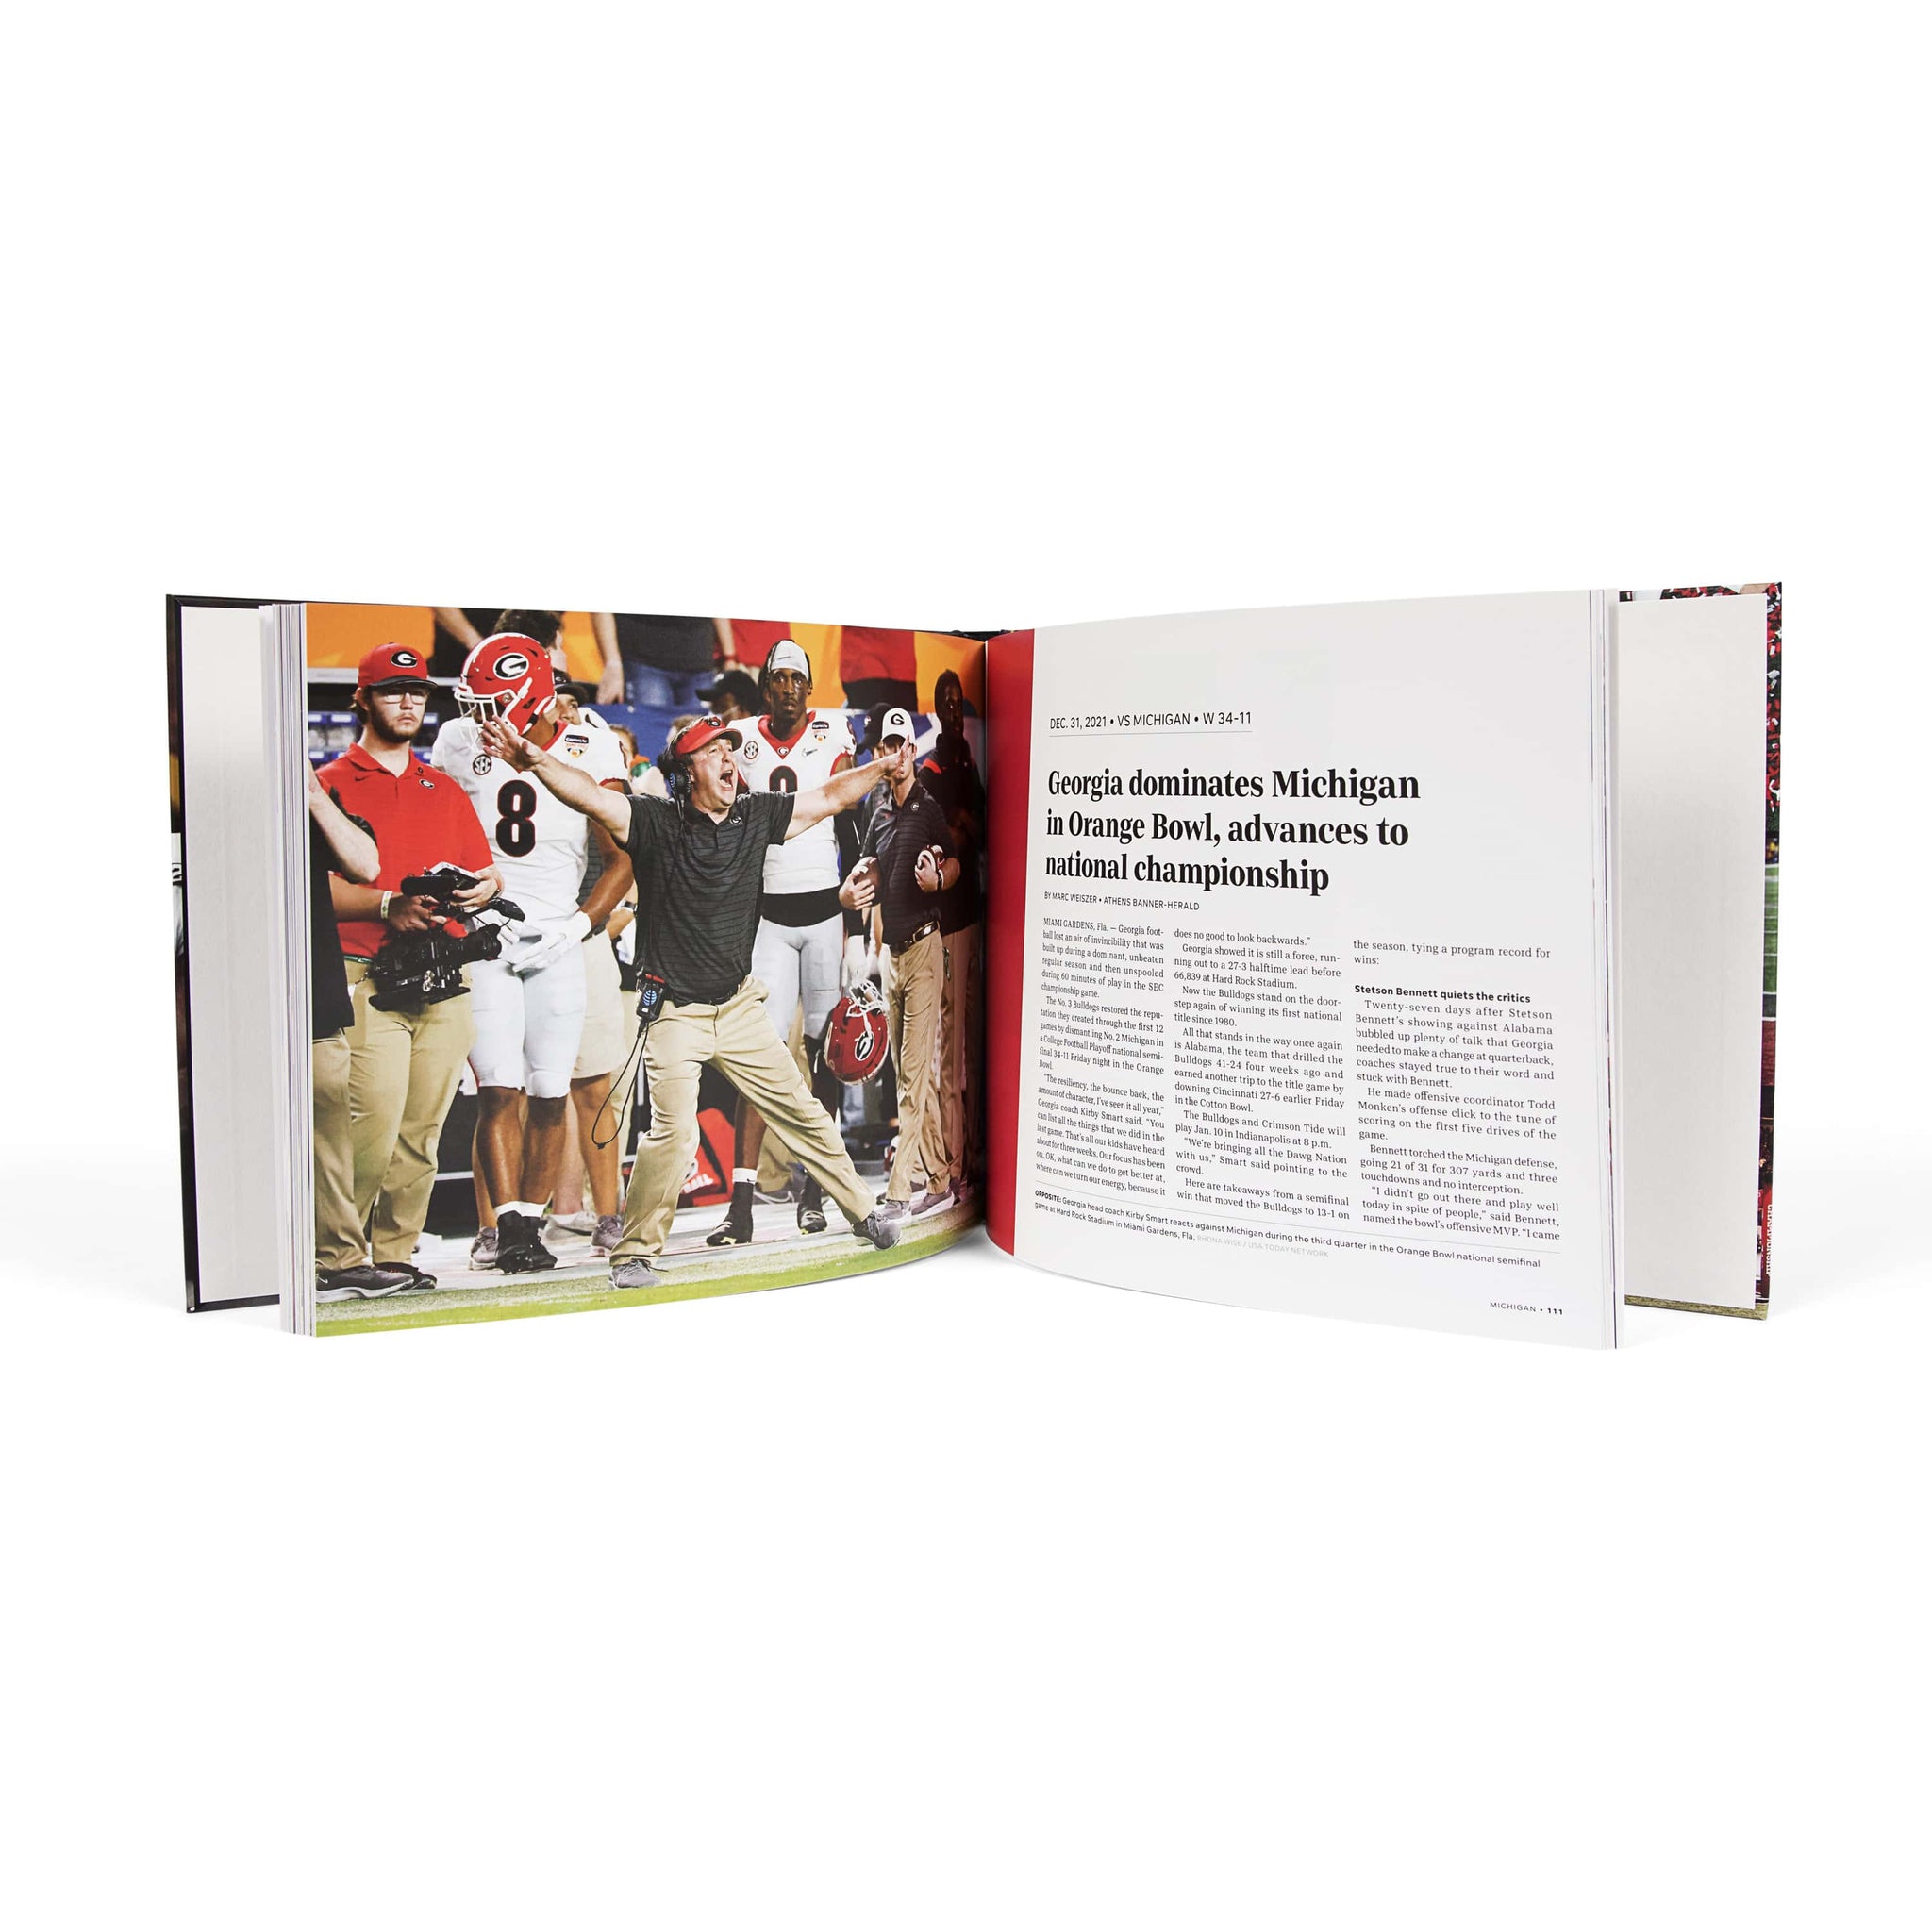 Top Dawgs' captures UGA's championship season in an exclusive book